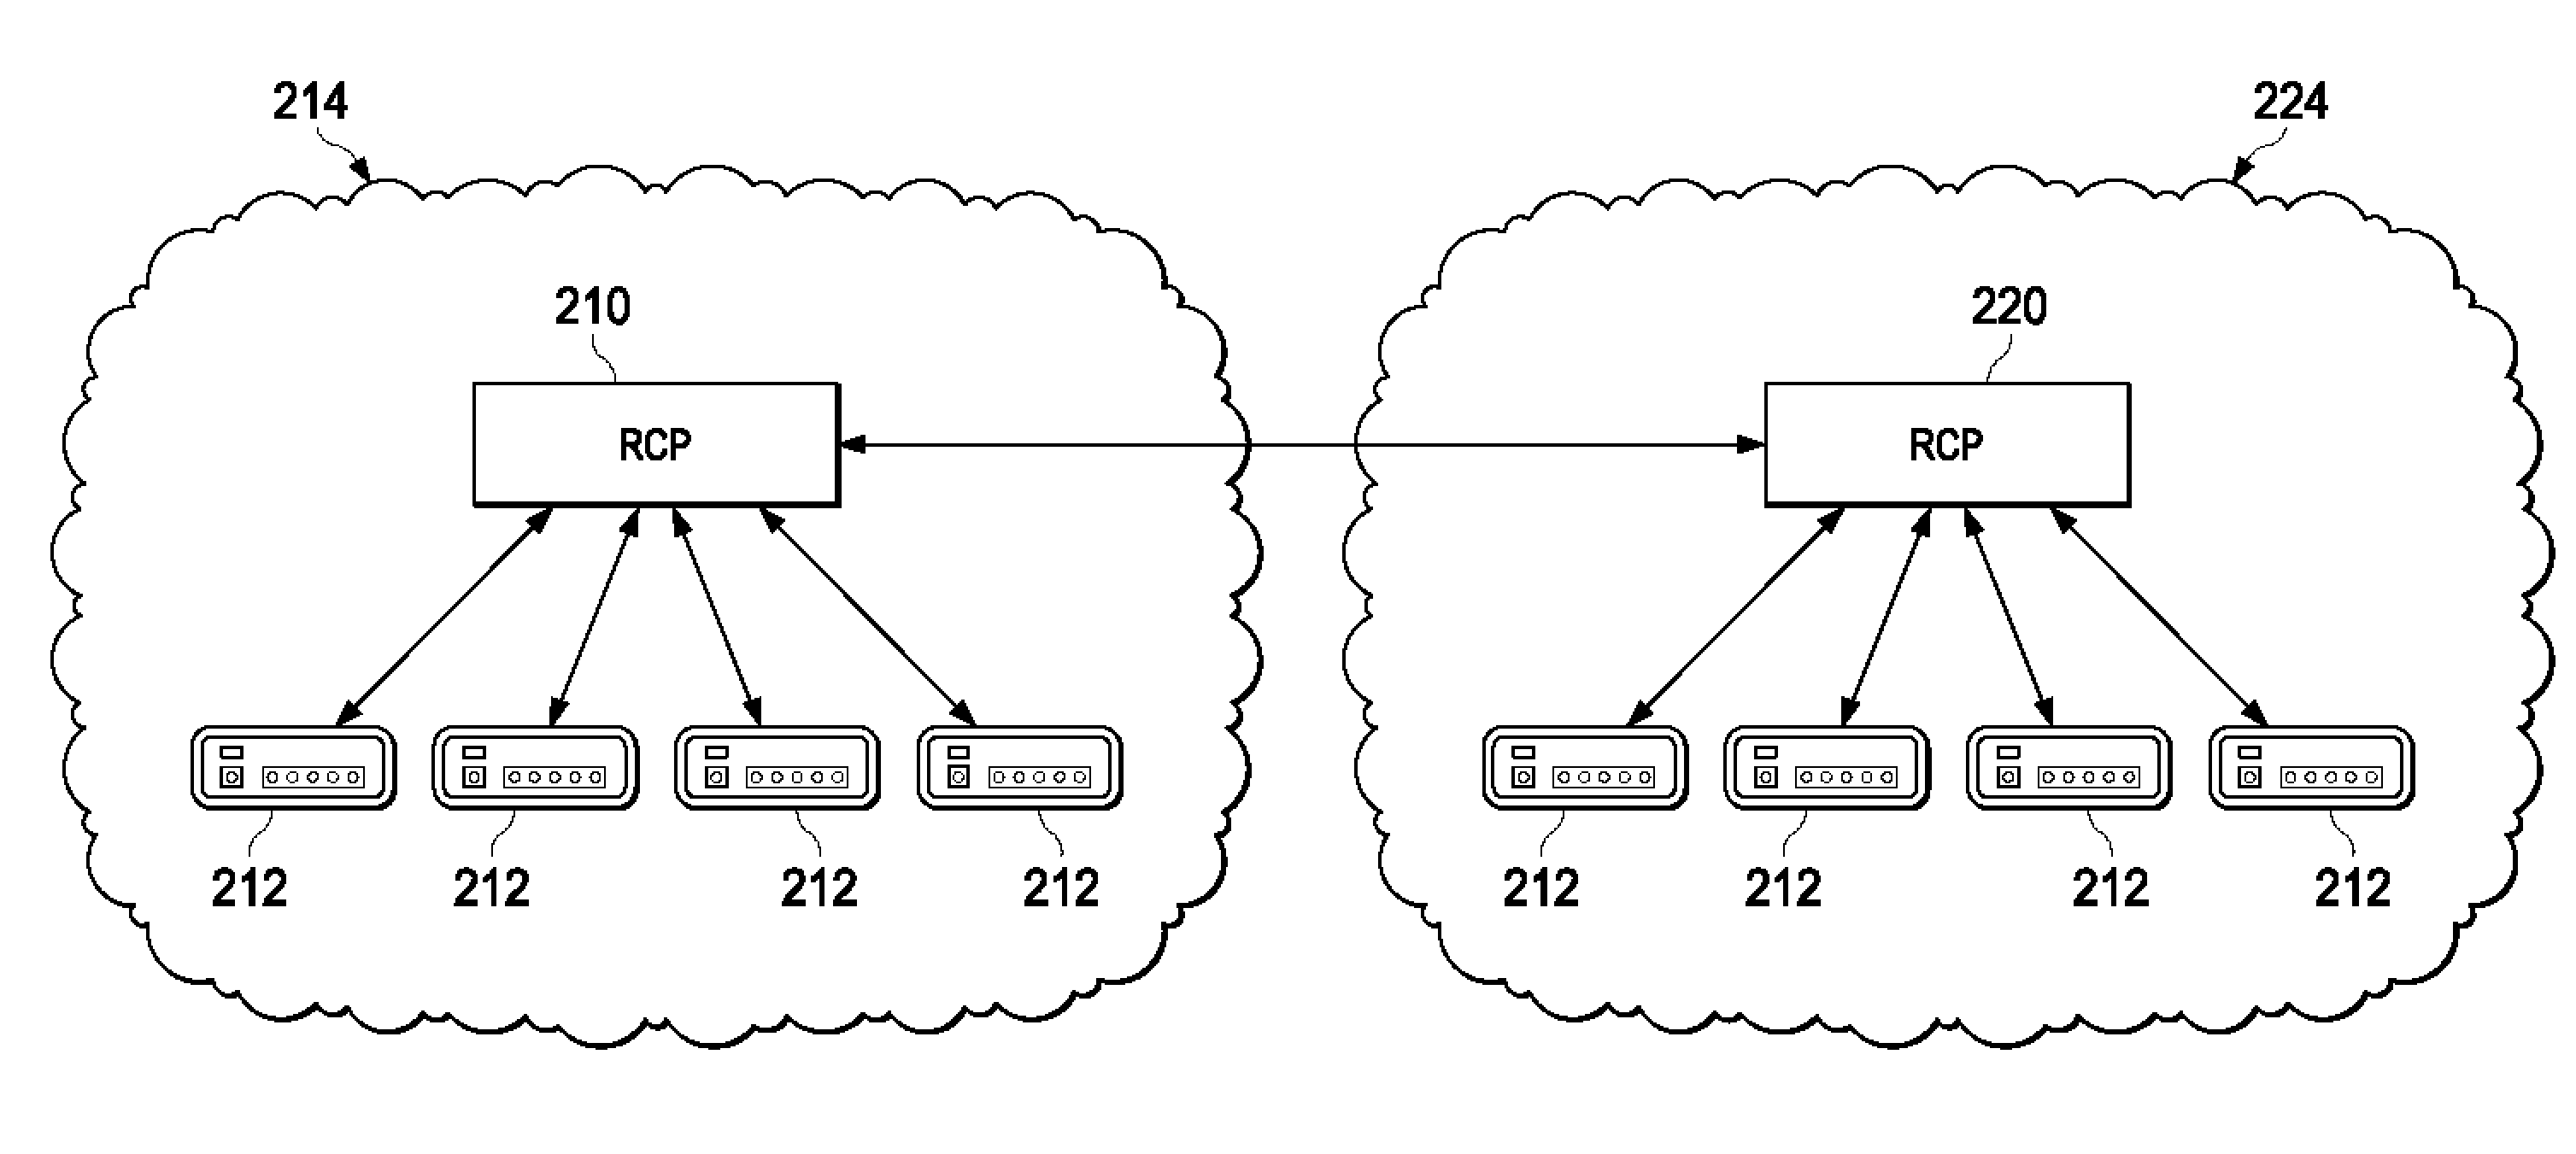 System and Method for Service Assurance in IP Networks